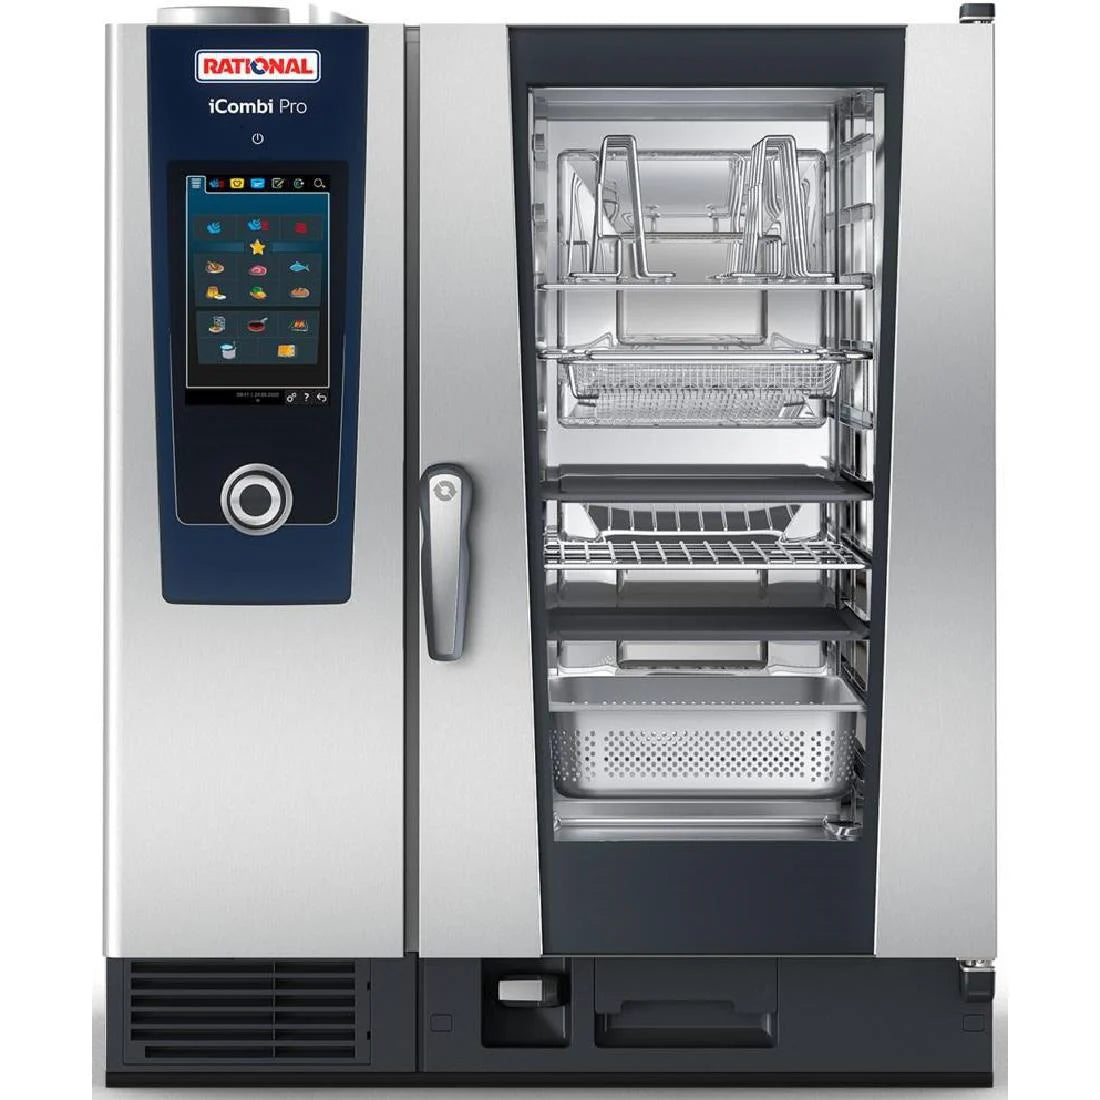 Rational iCombi Pro Combi Oven ICP 10-1/1/G .Product Ref:00664.Model:ICP 10-1/1/G/N-🚚 3-5 DAYS DELIVERY